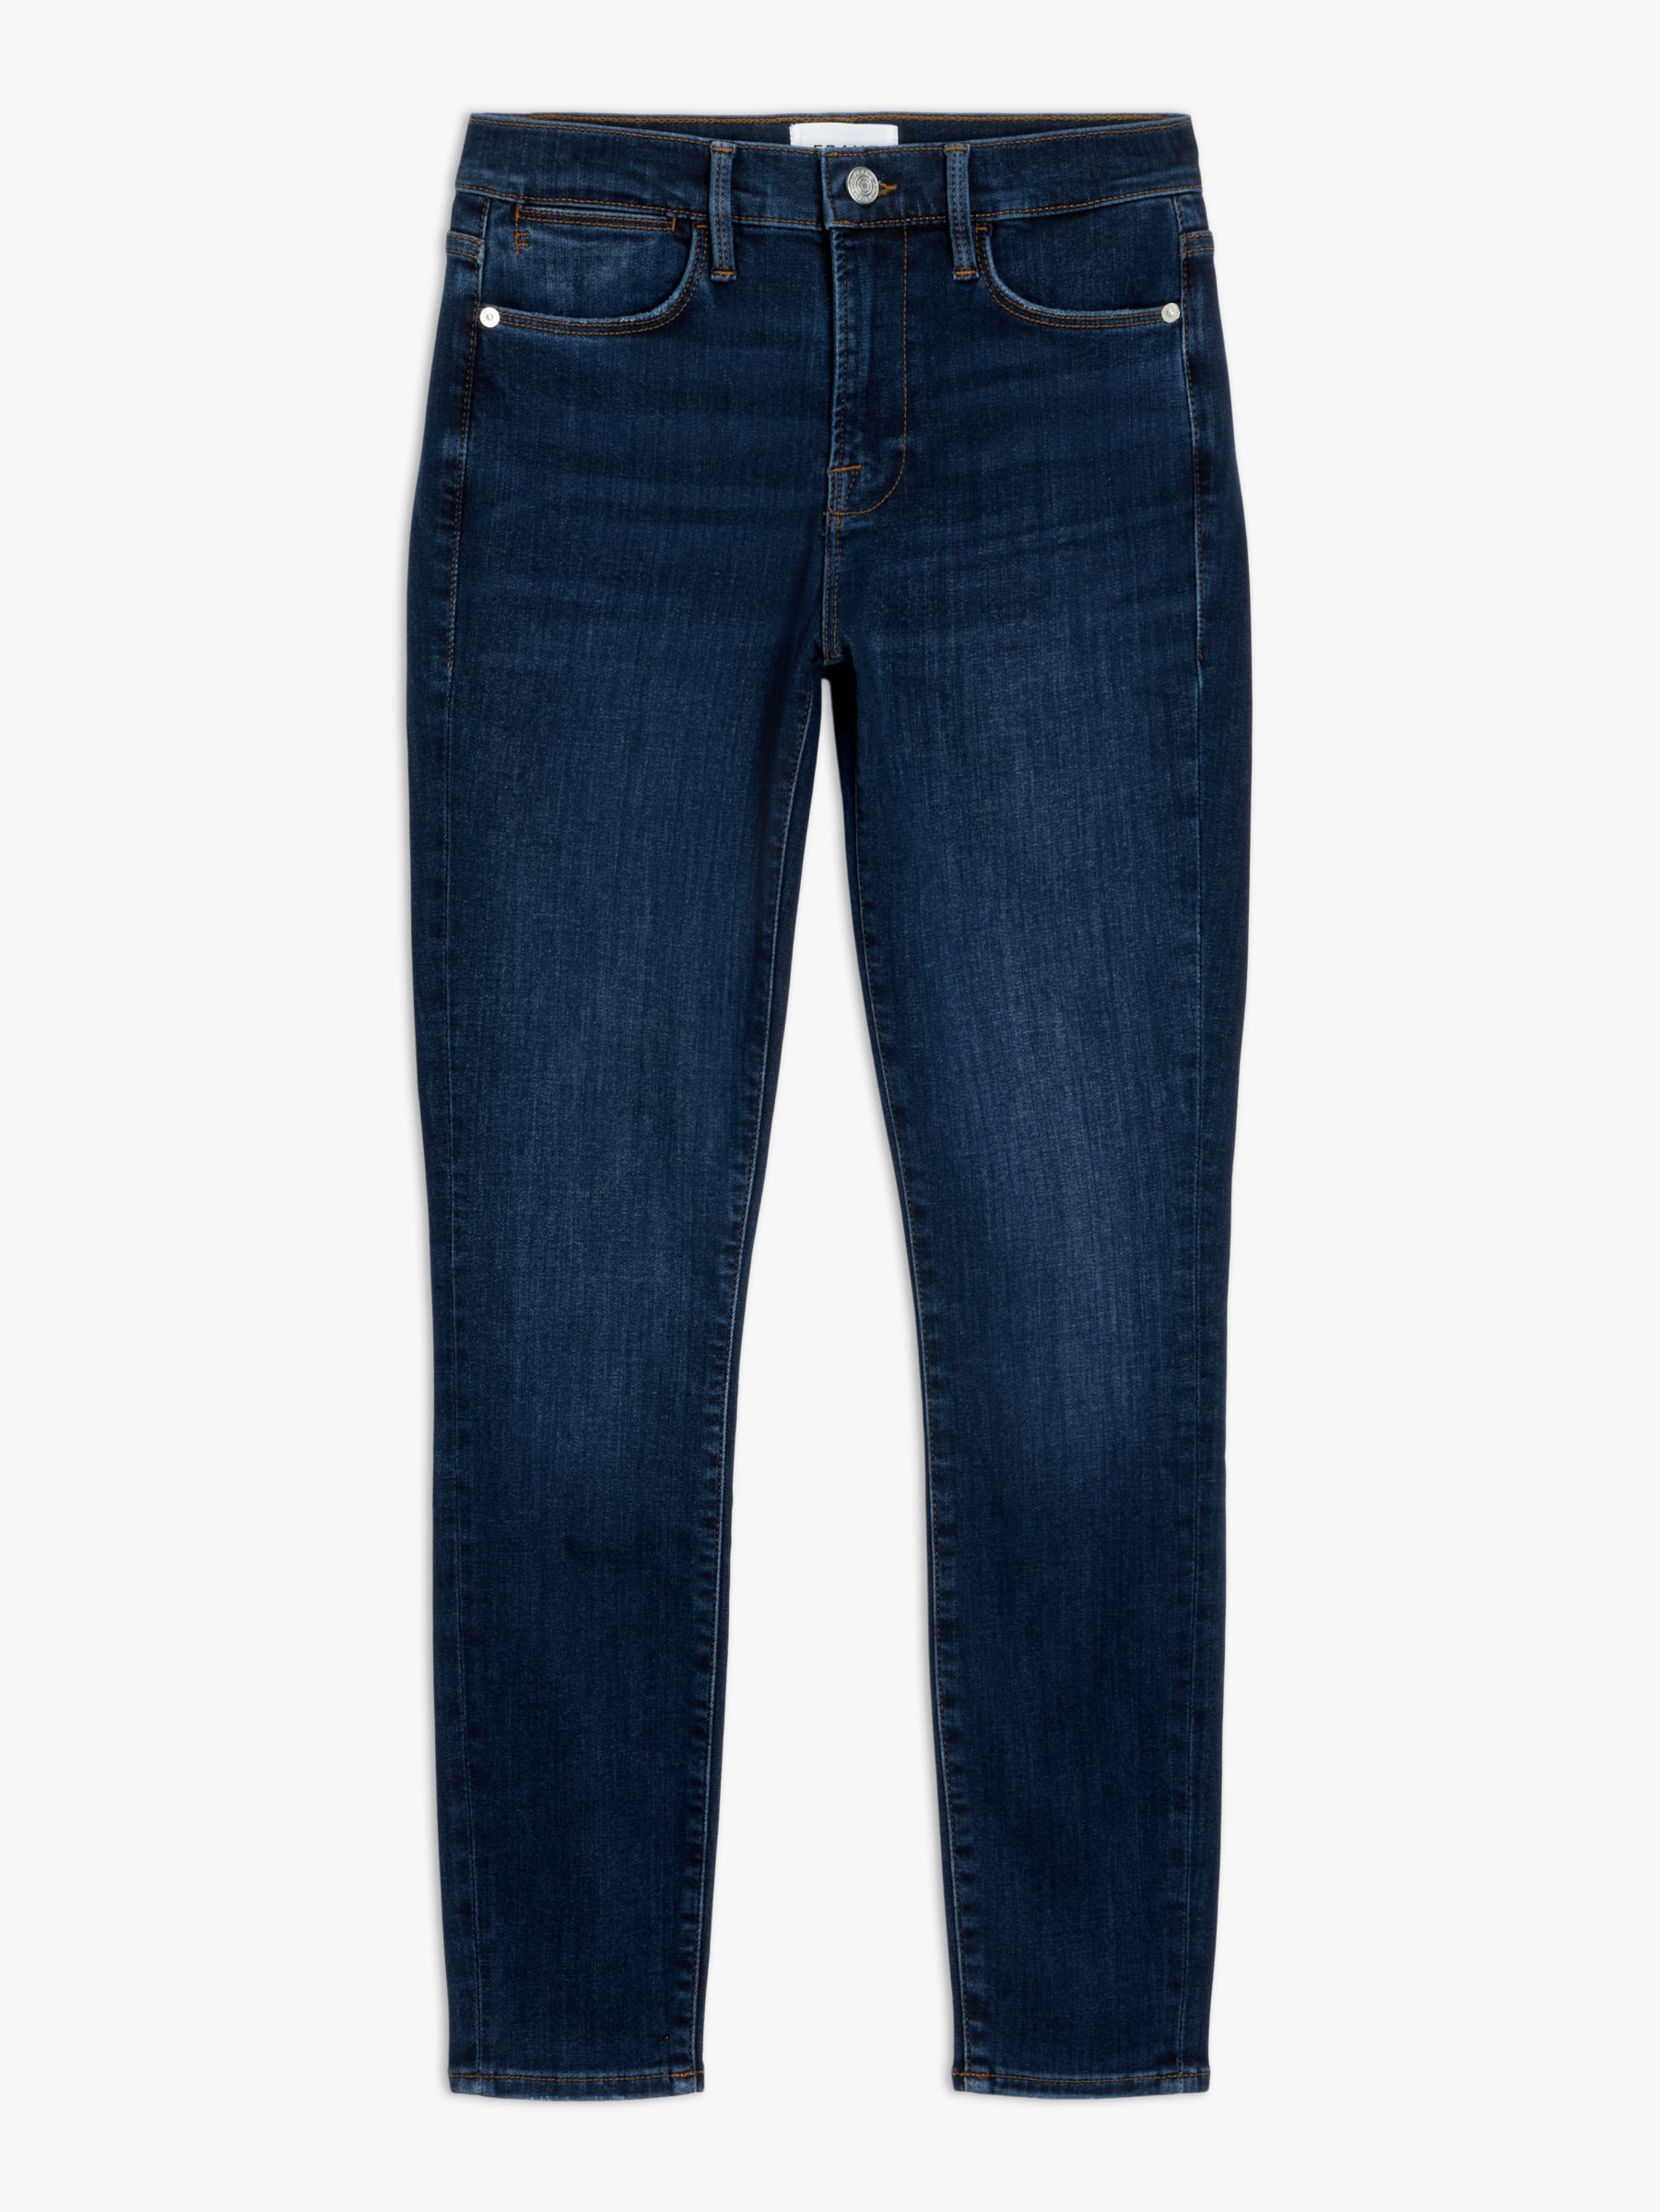 FRAME Le High Skinny Ankle Jeans, Majesty at John Lewis & Partners